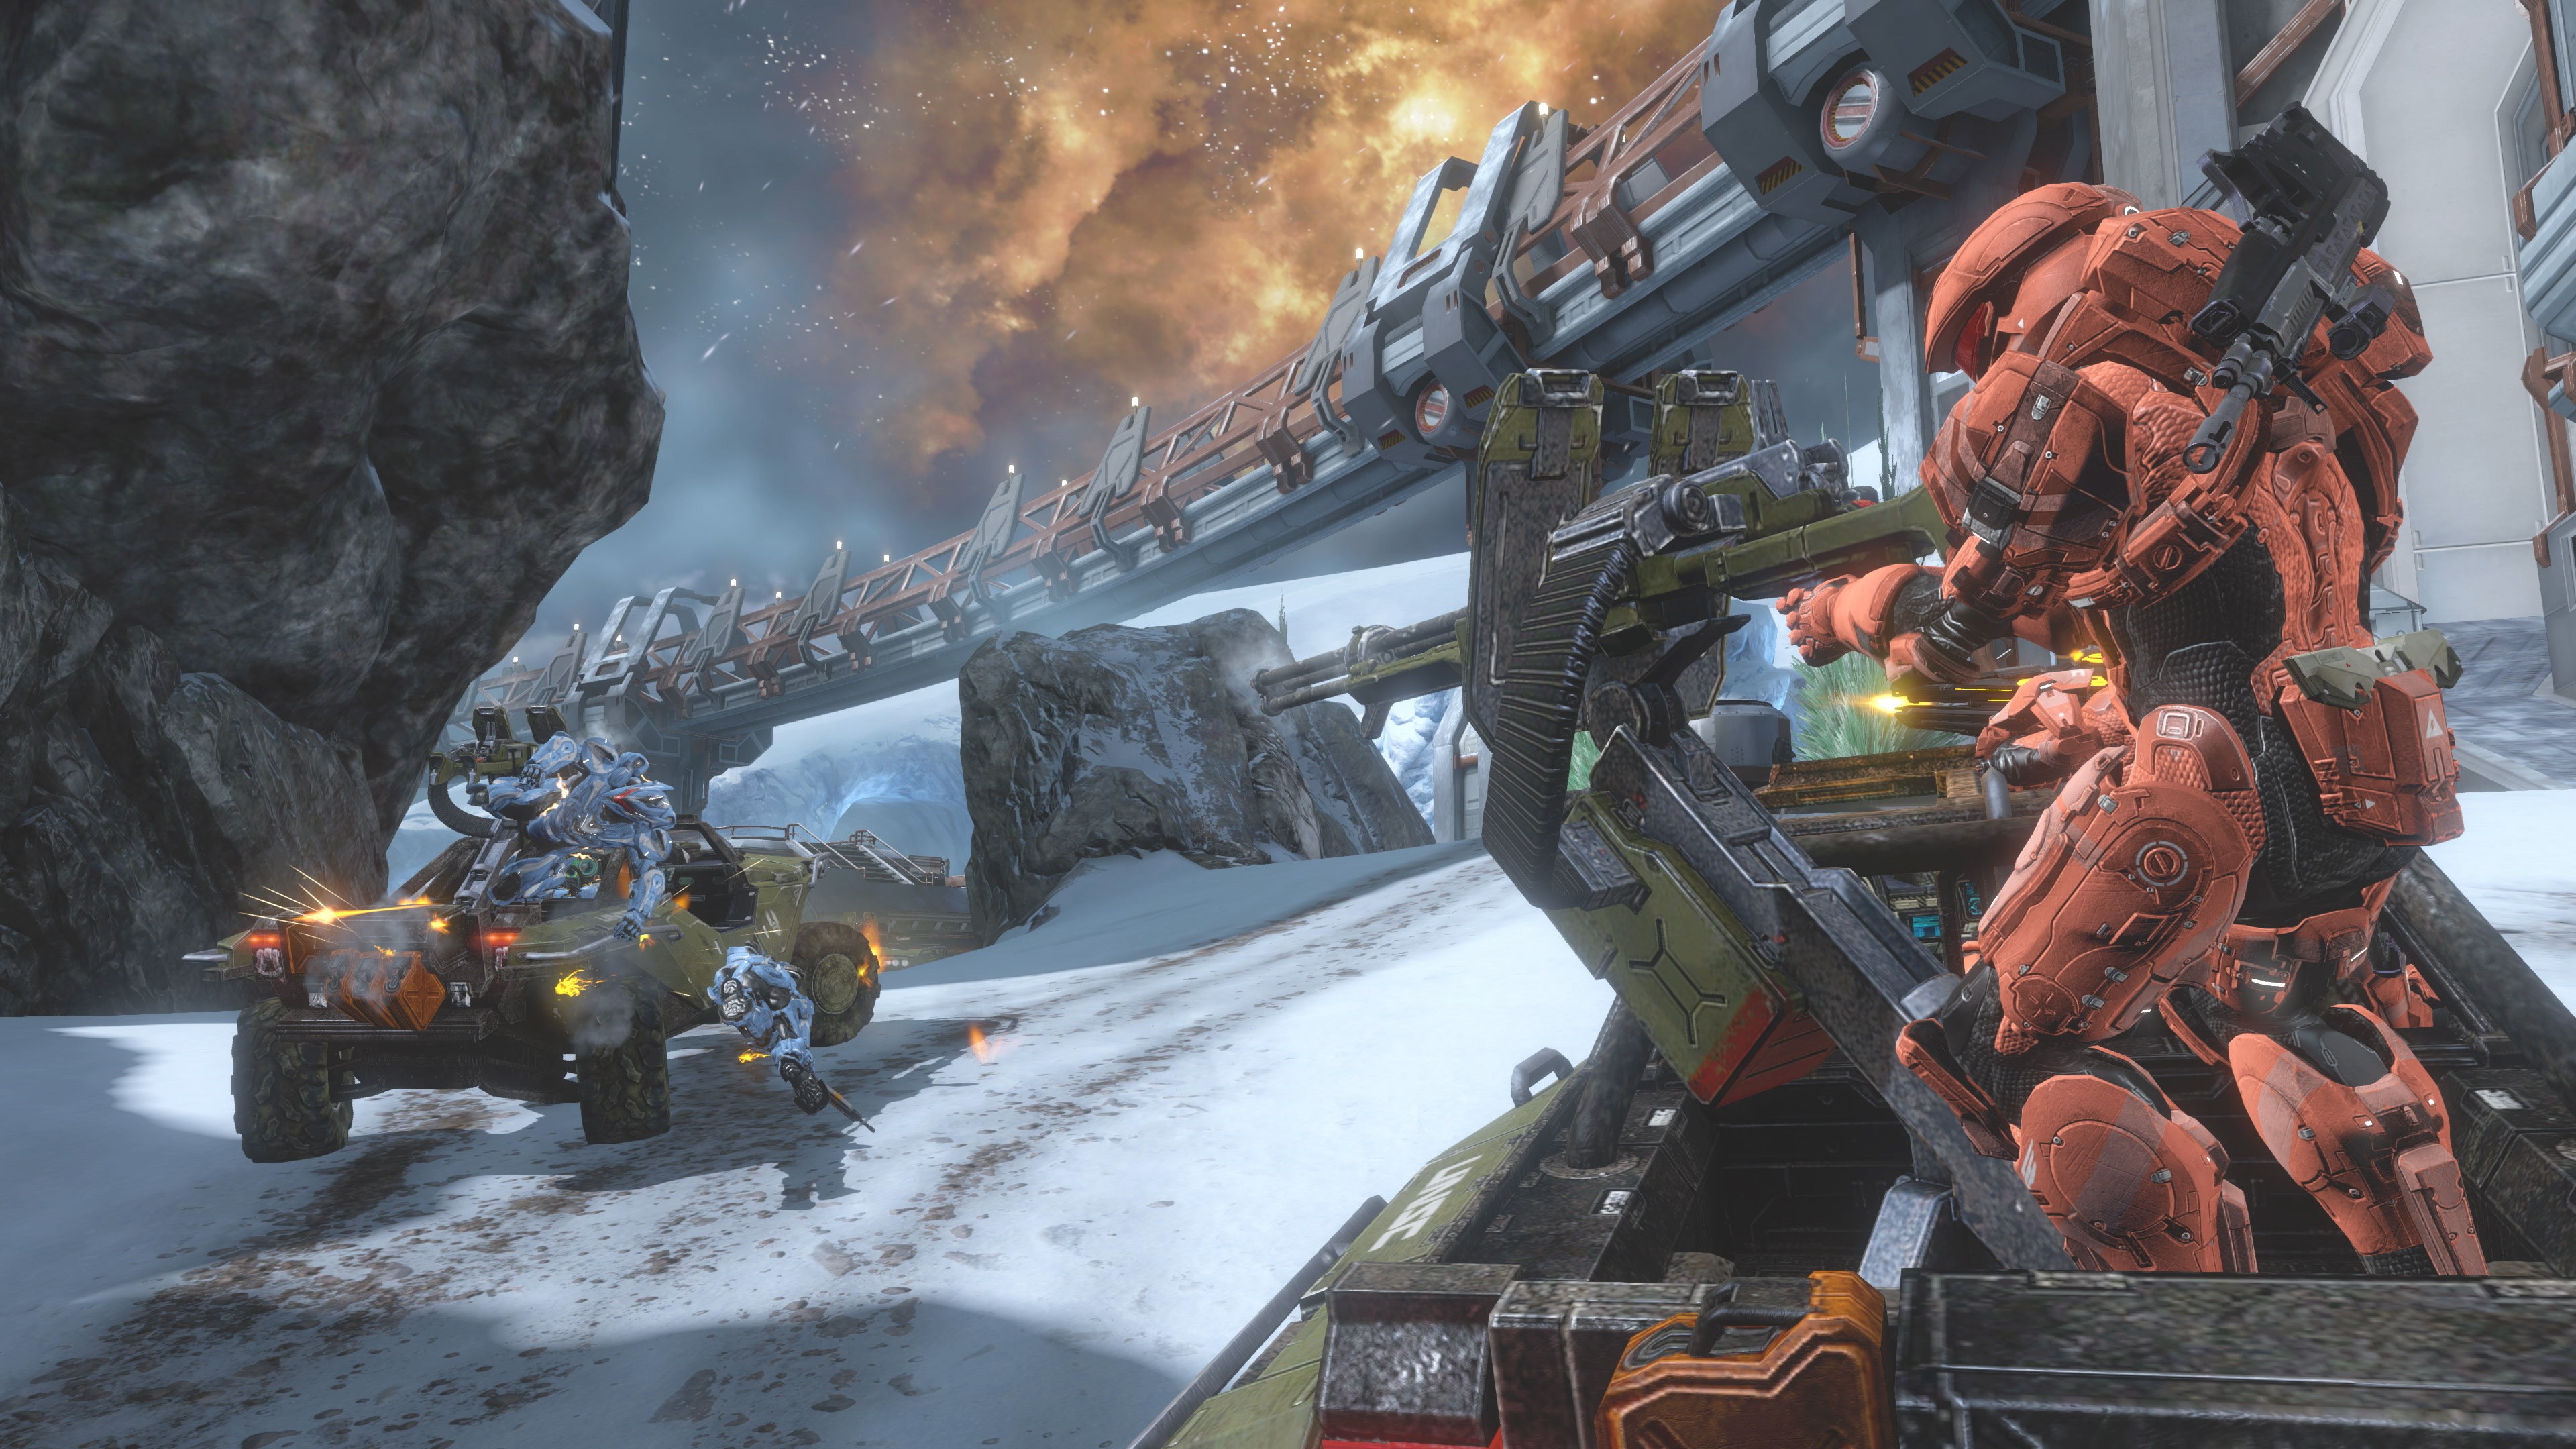 Spartans in red and blue battle each other on a snowy map in Halo 4 multiplayer